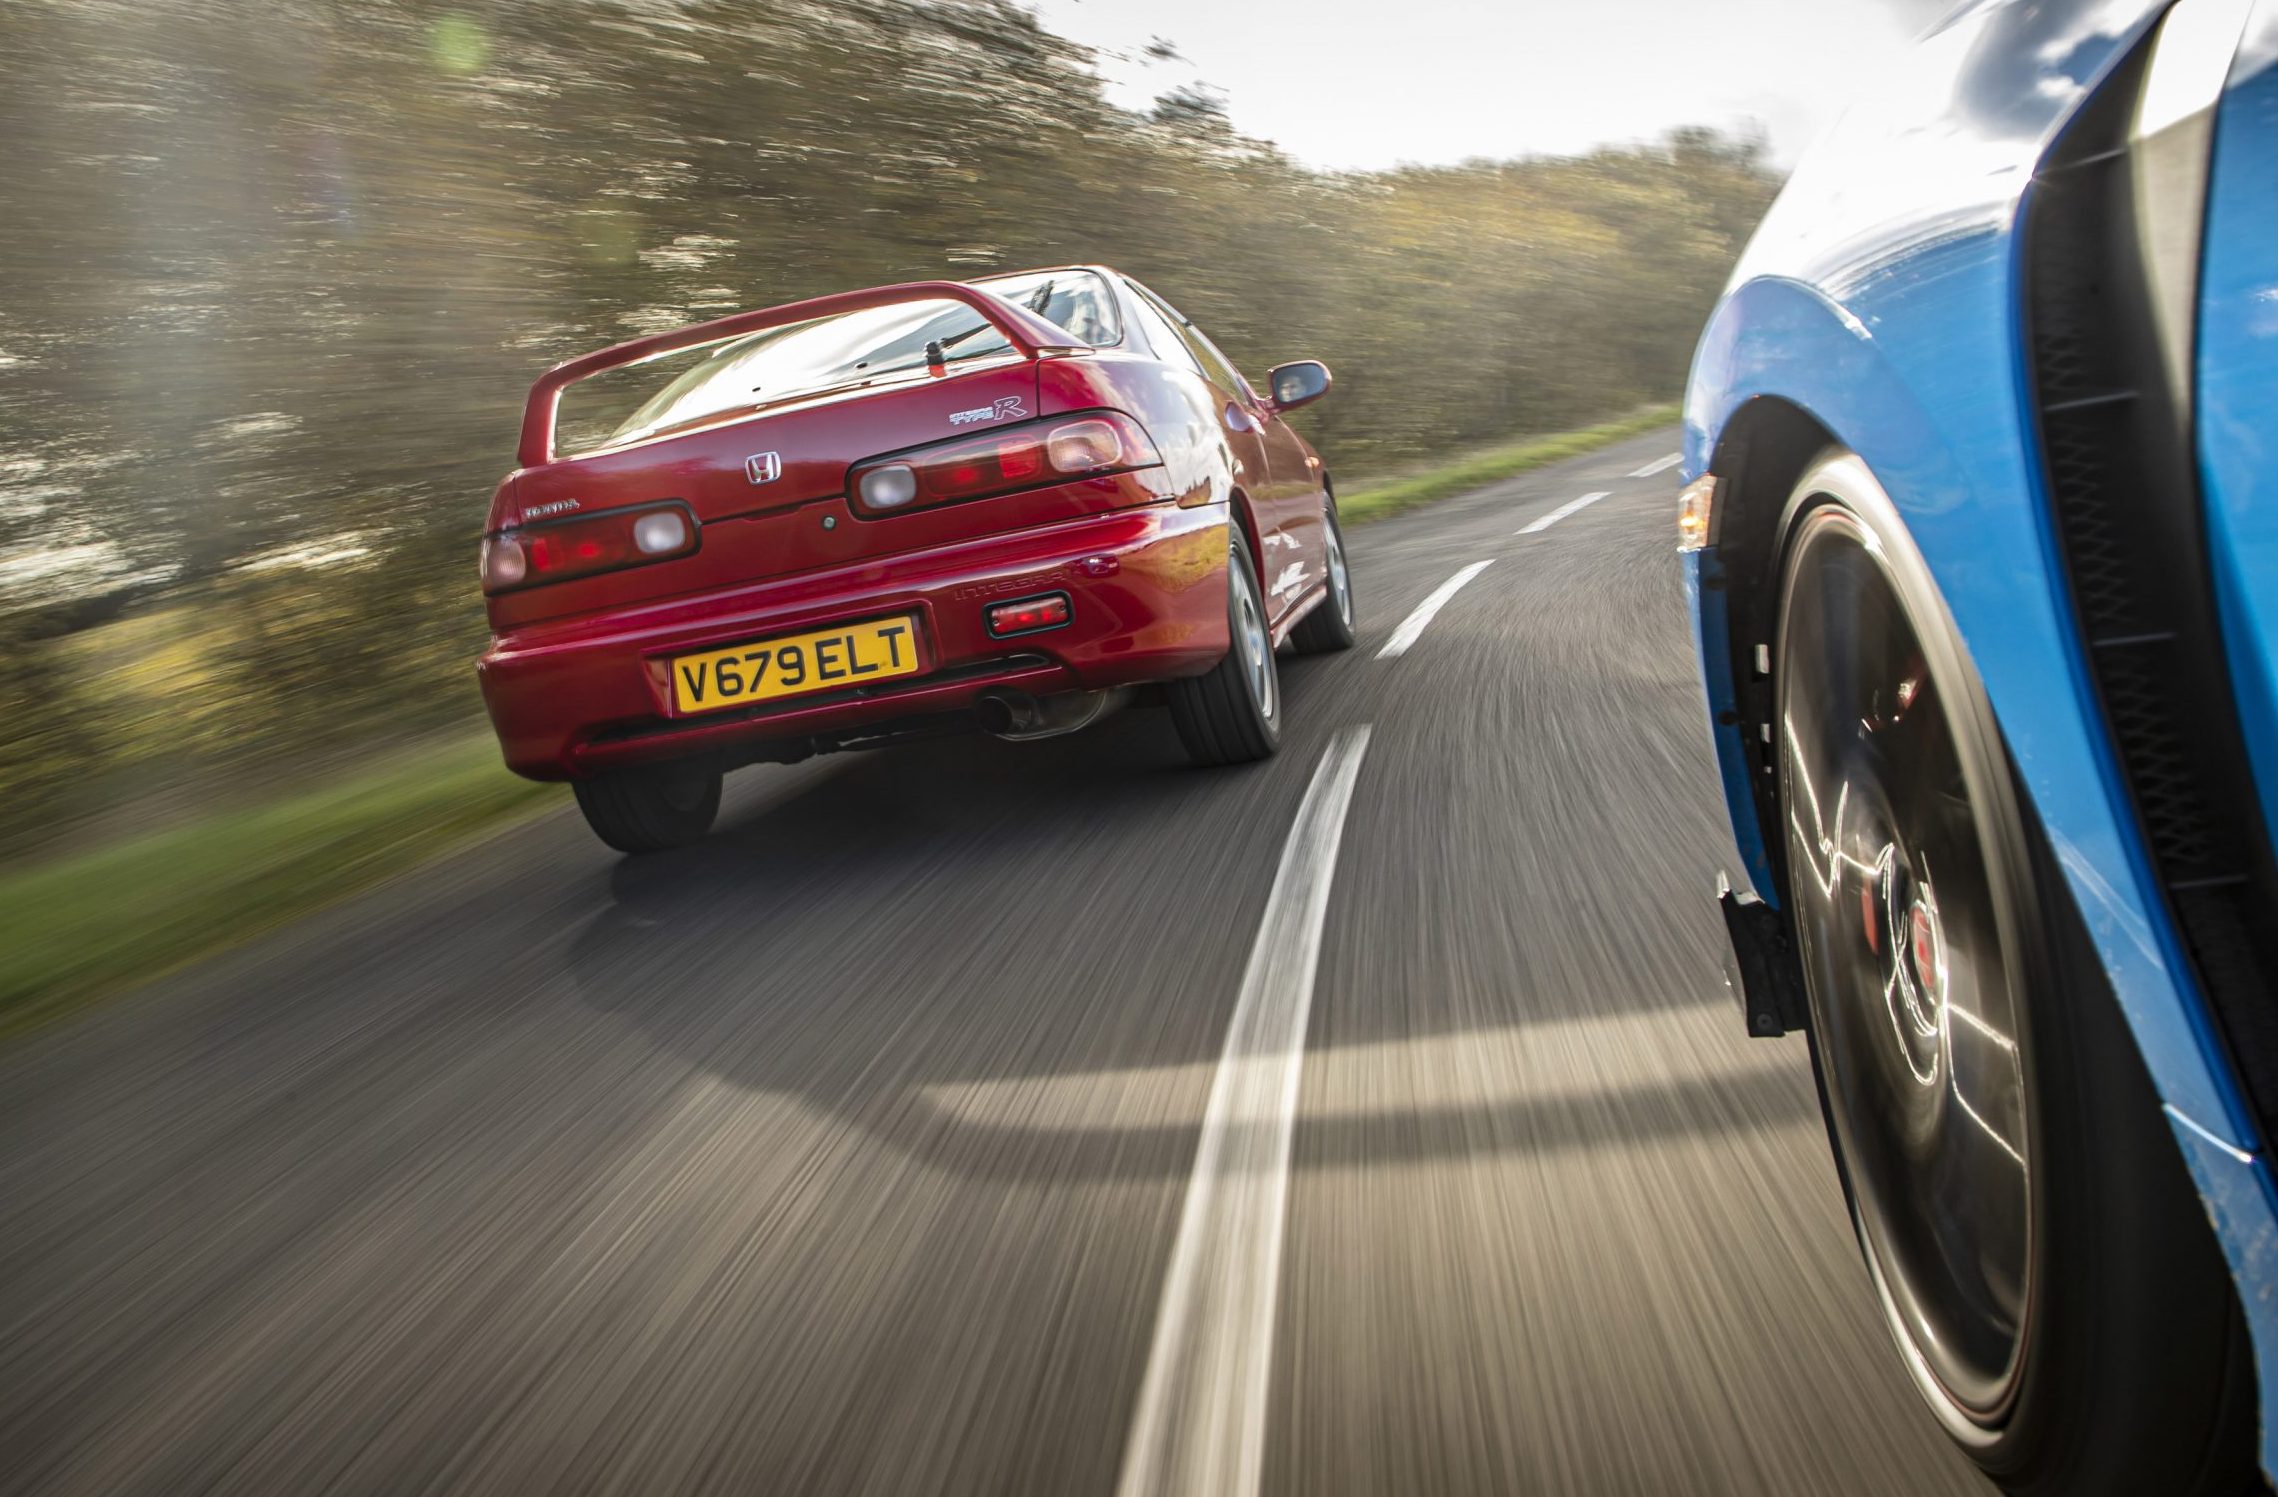 Take your pick of 30 years of Honda’s Type-R cars